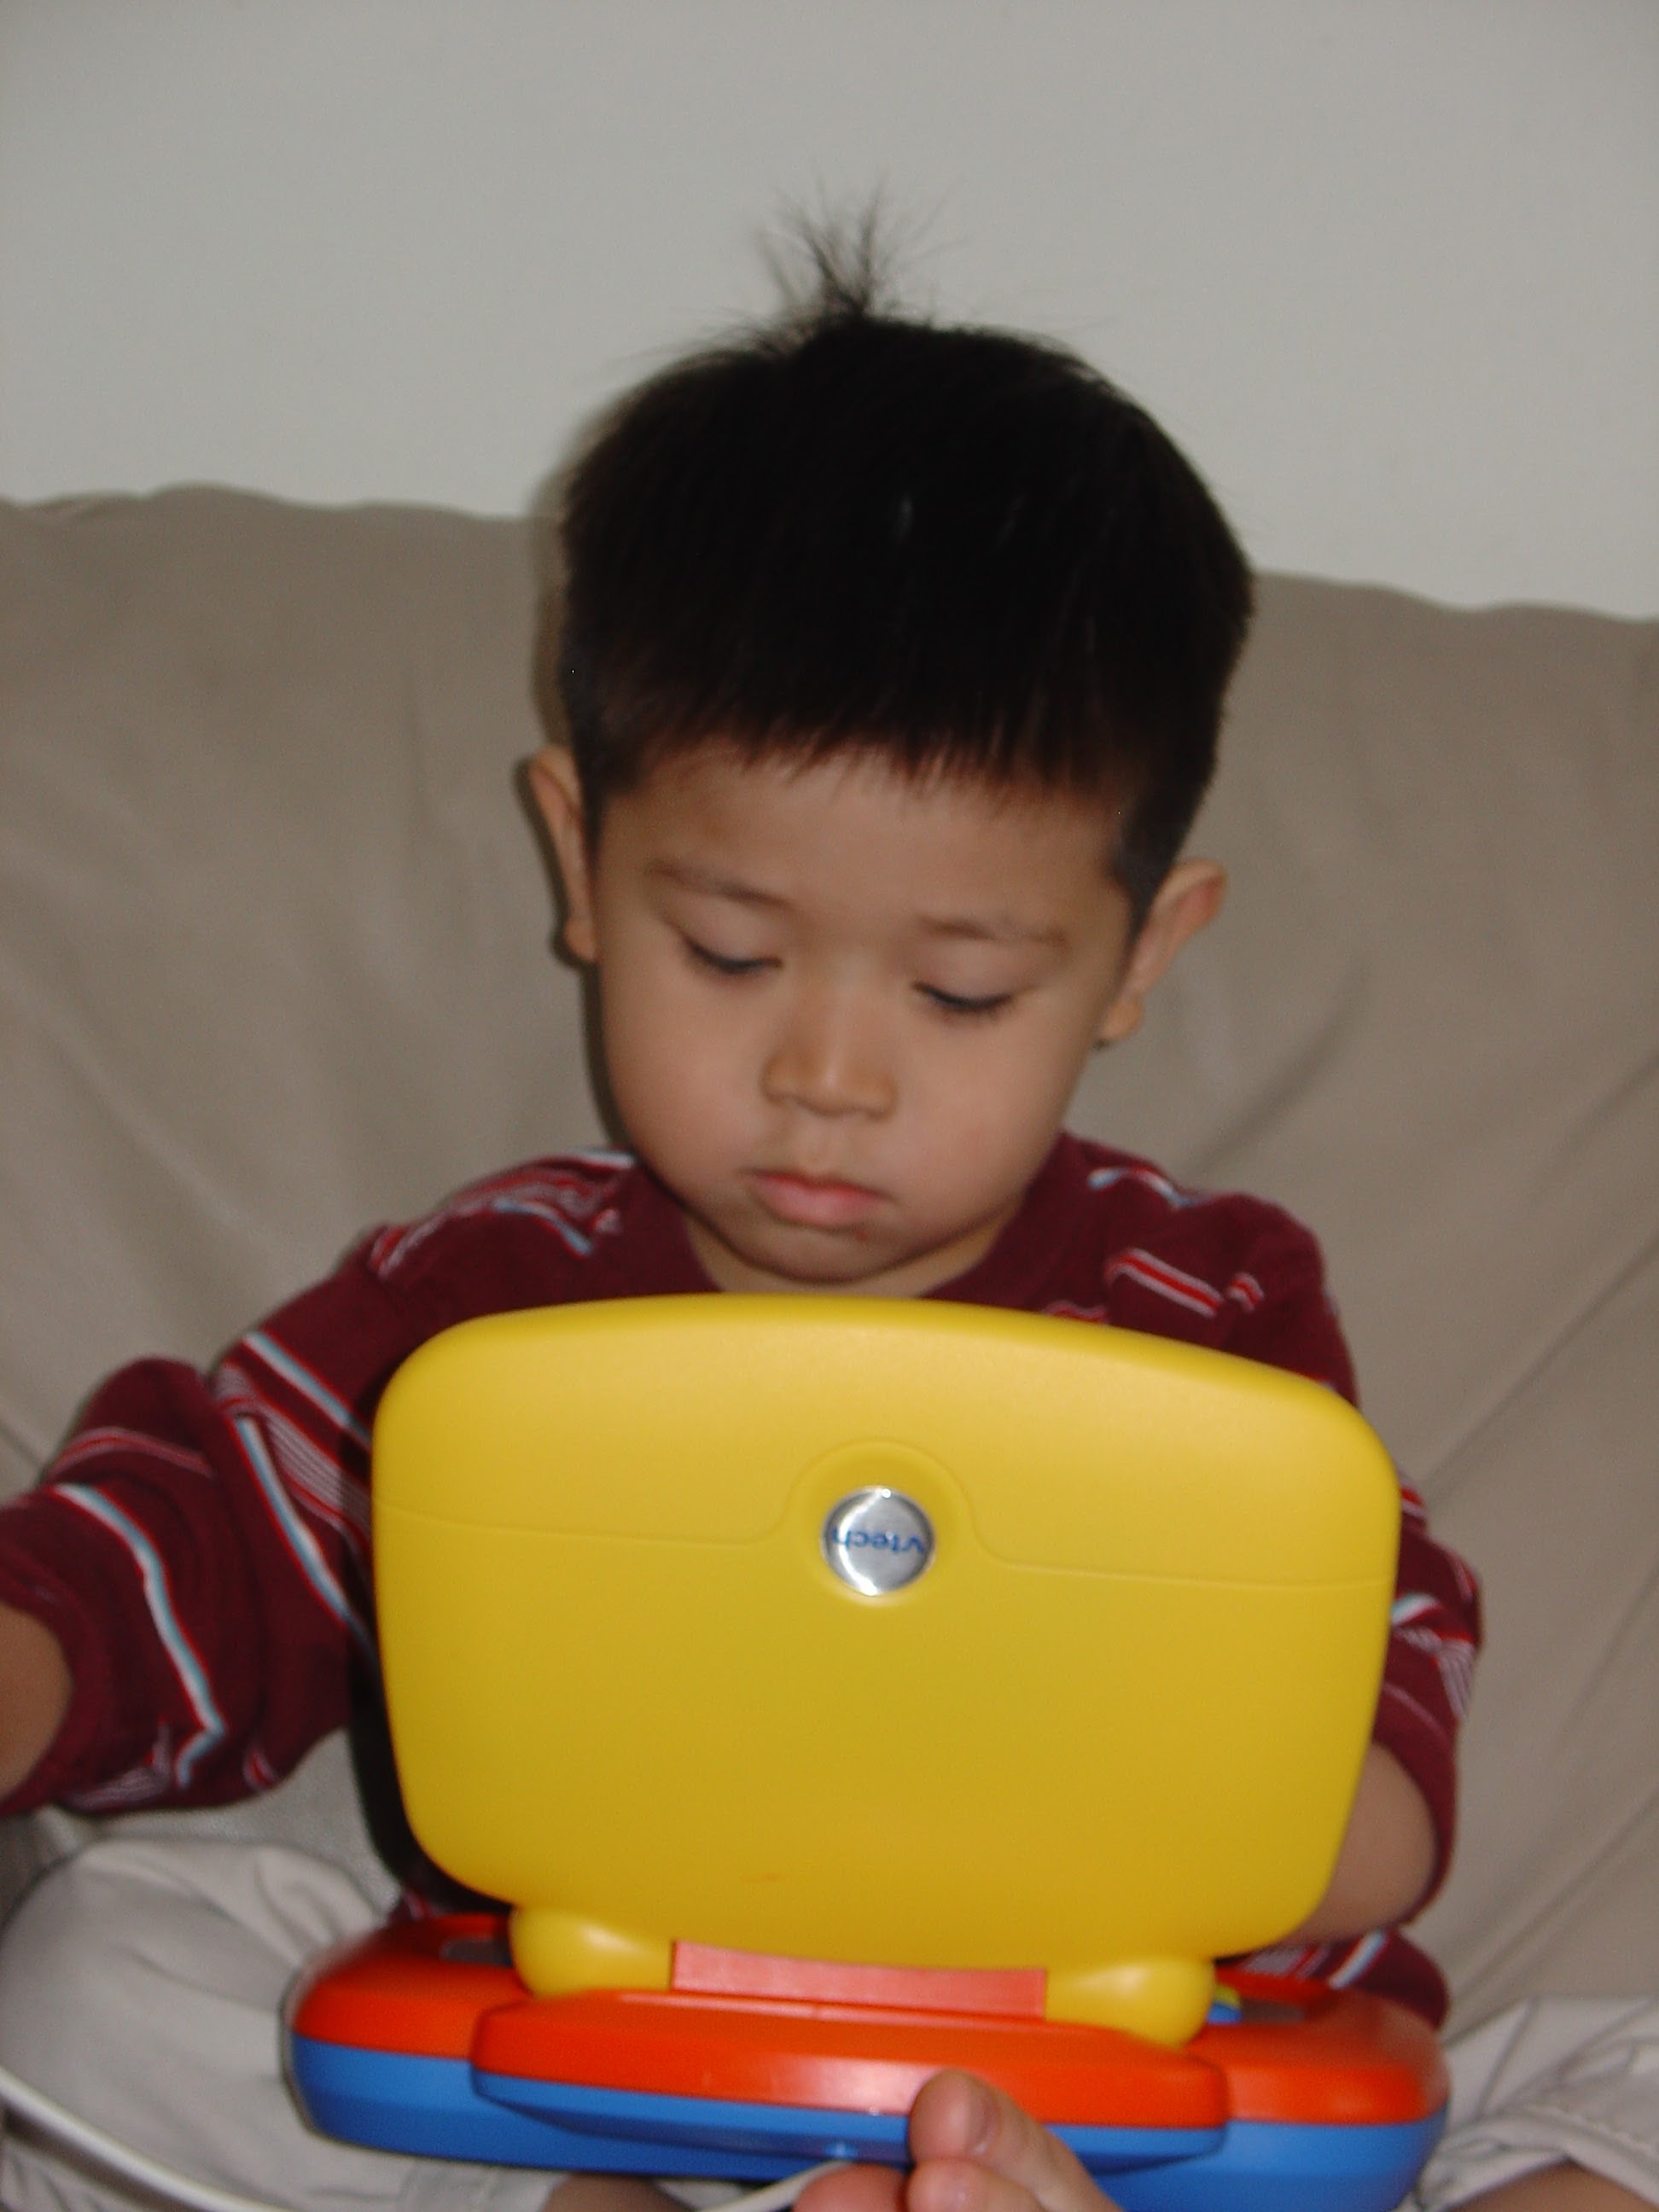 William Nguyen as a baby holding a toy computer